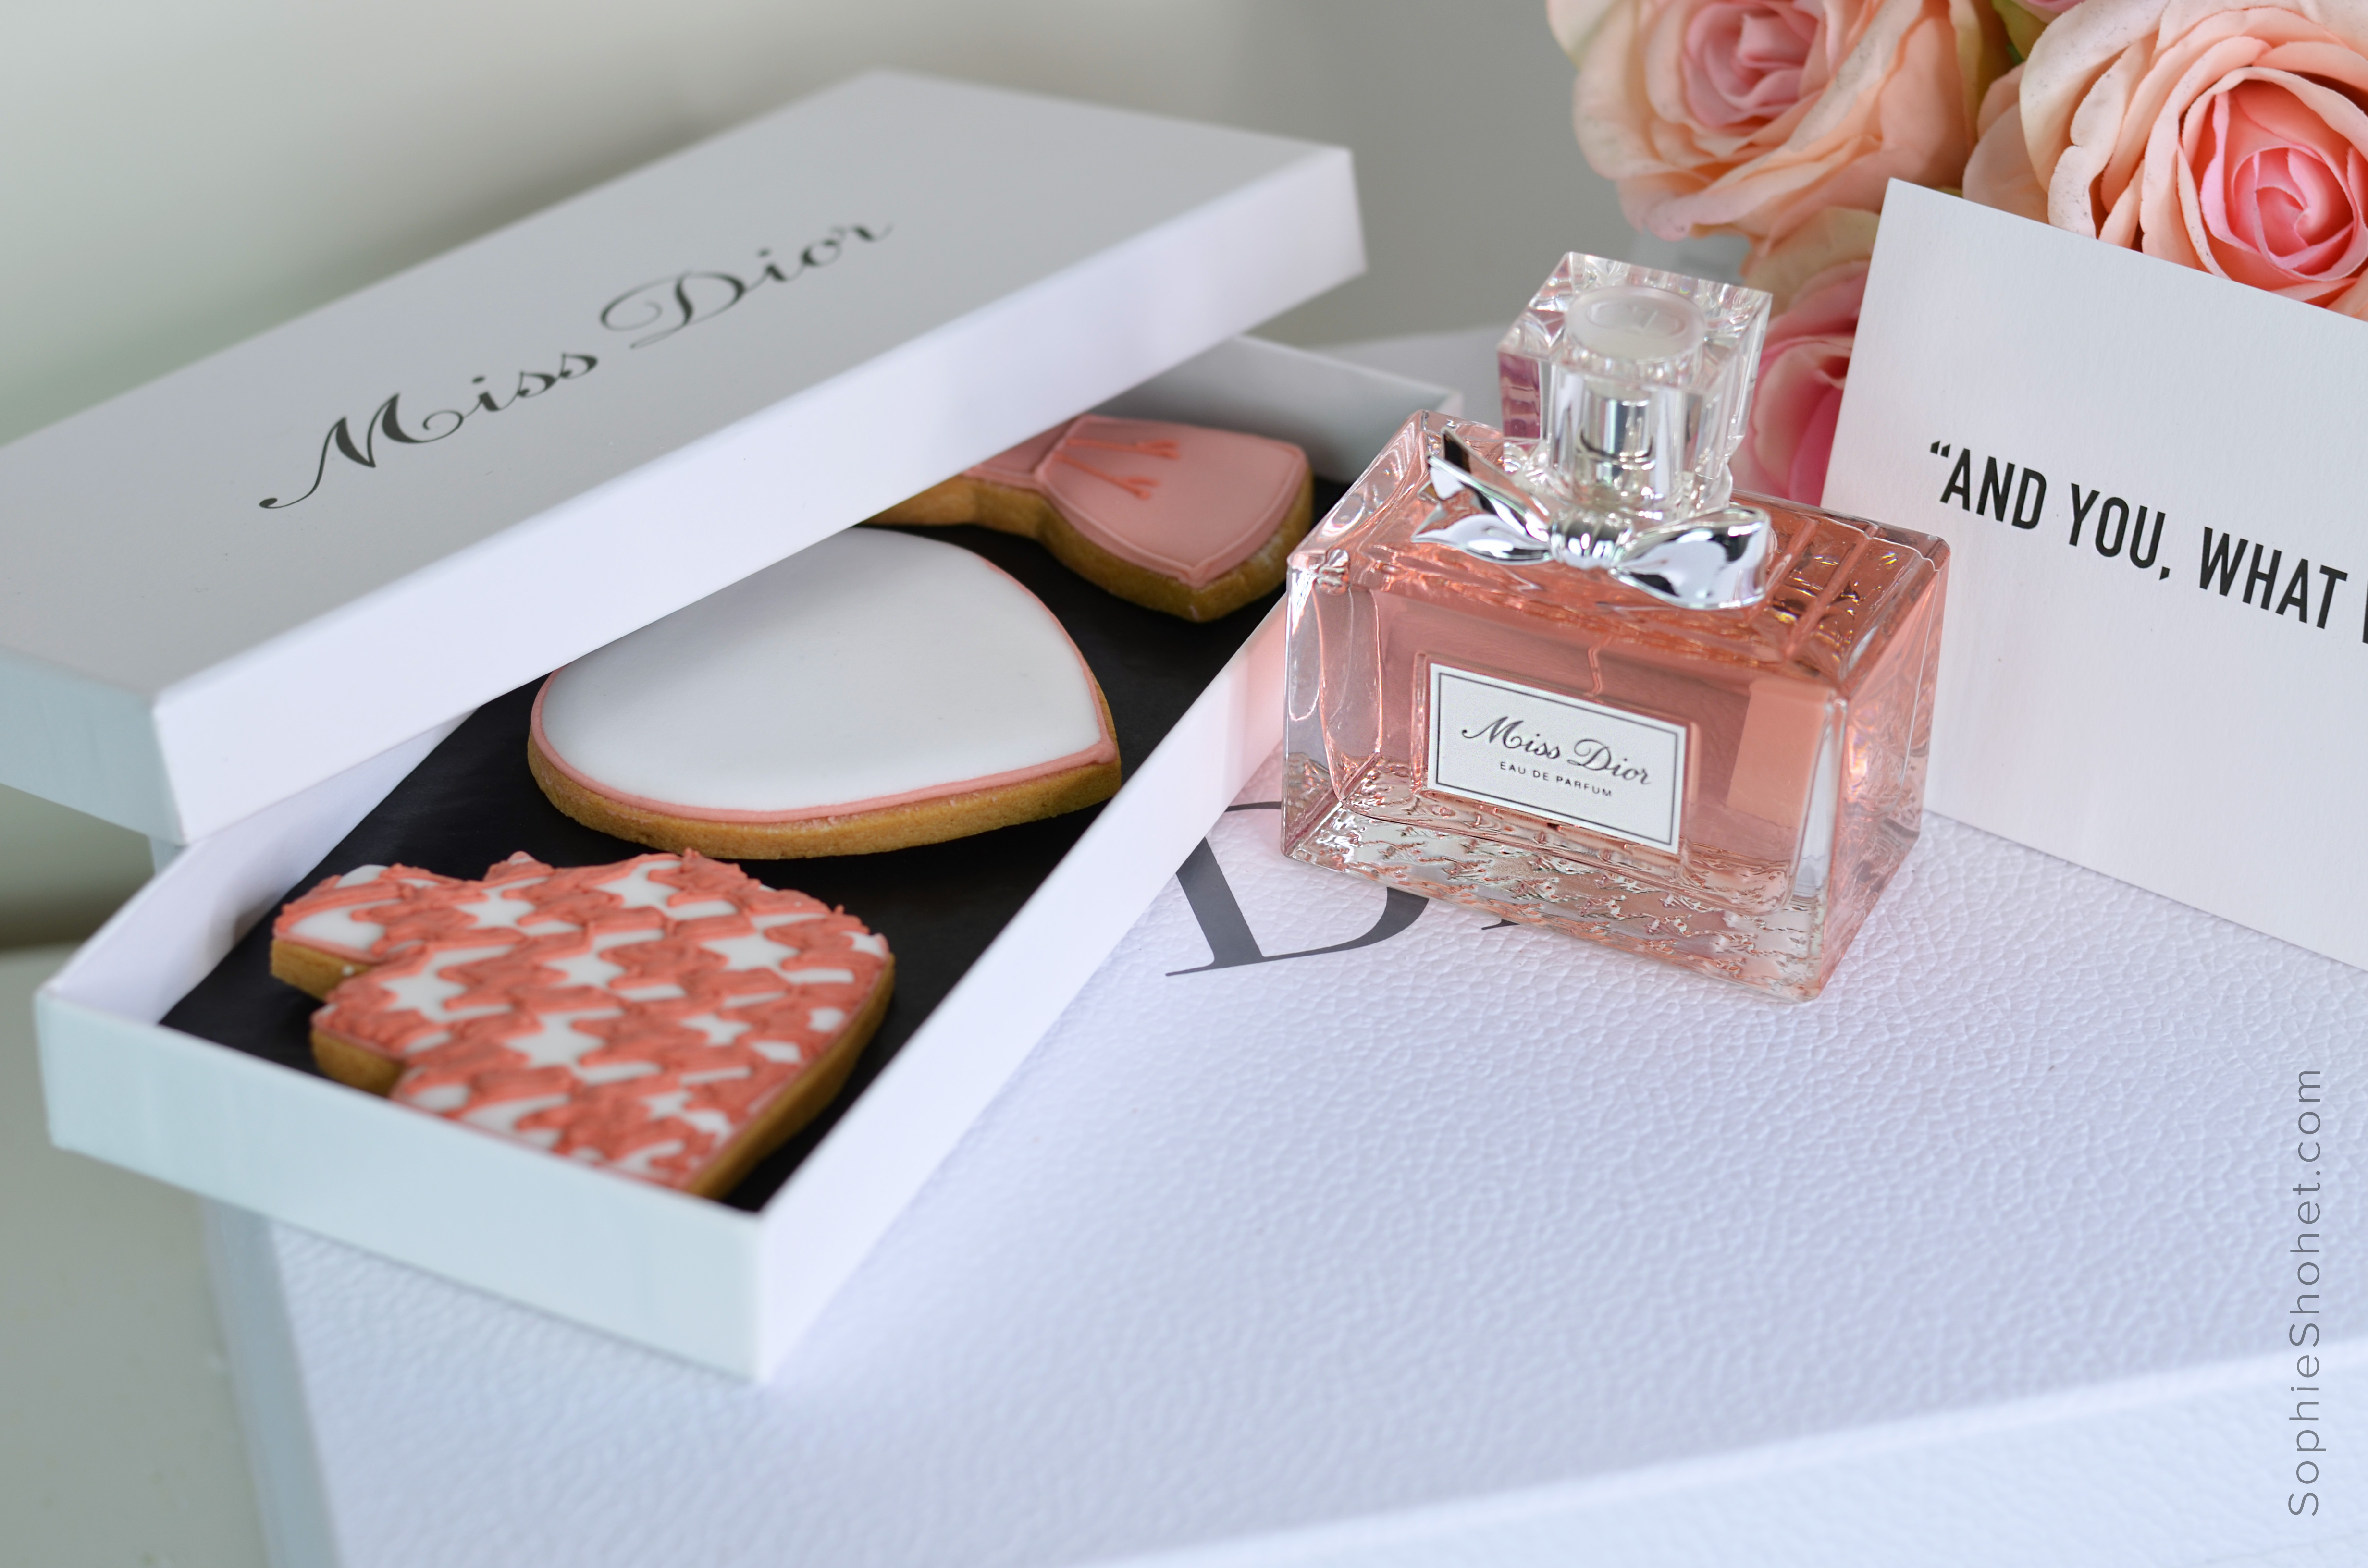 New Miss Dior perfume launch